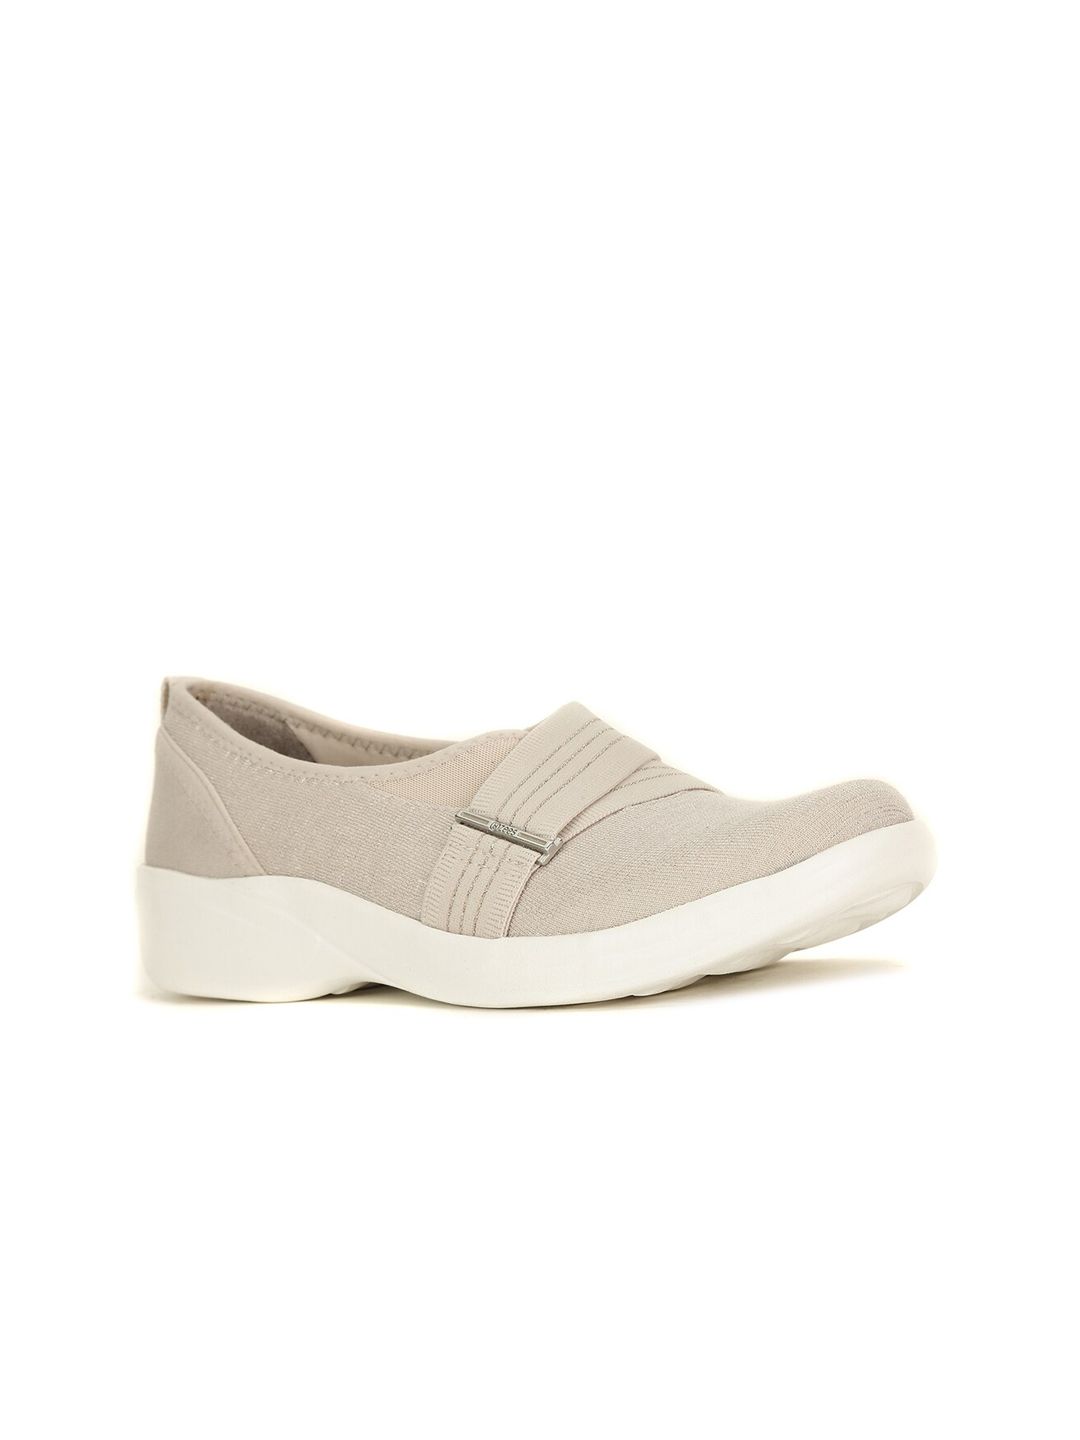 Naturalizer Women Off White Woven Design Slip-On Sneakers Price in India